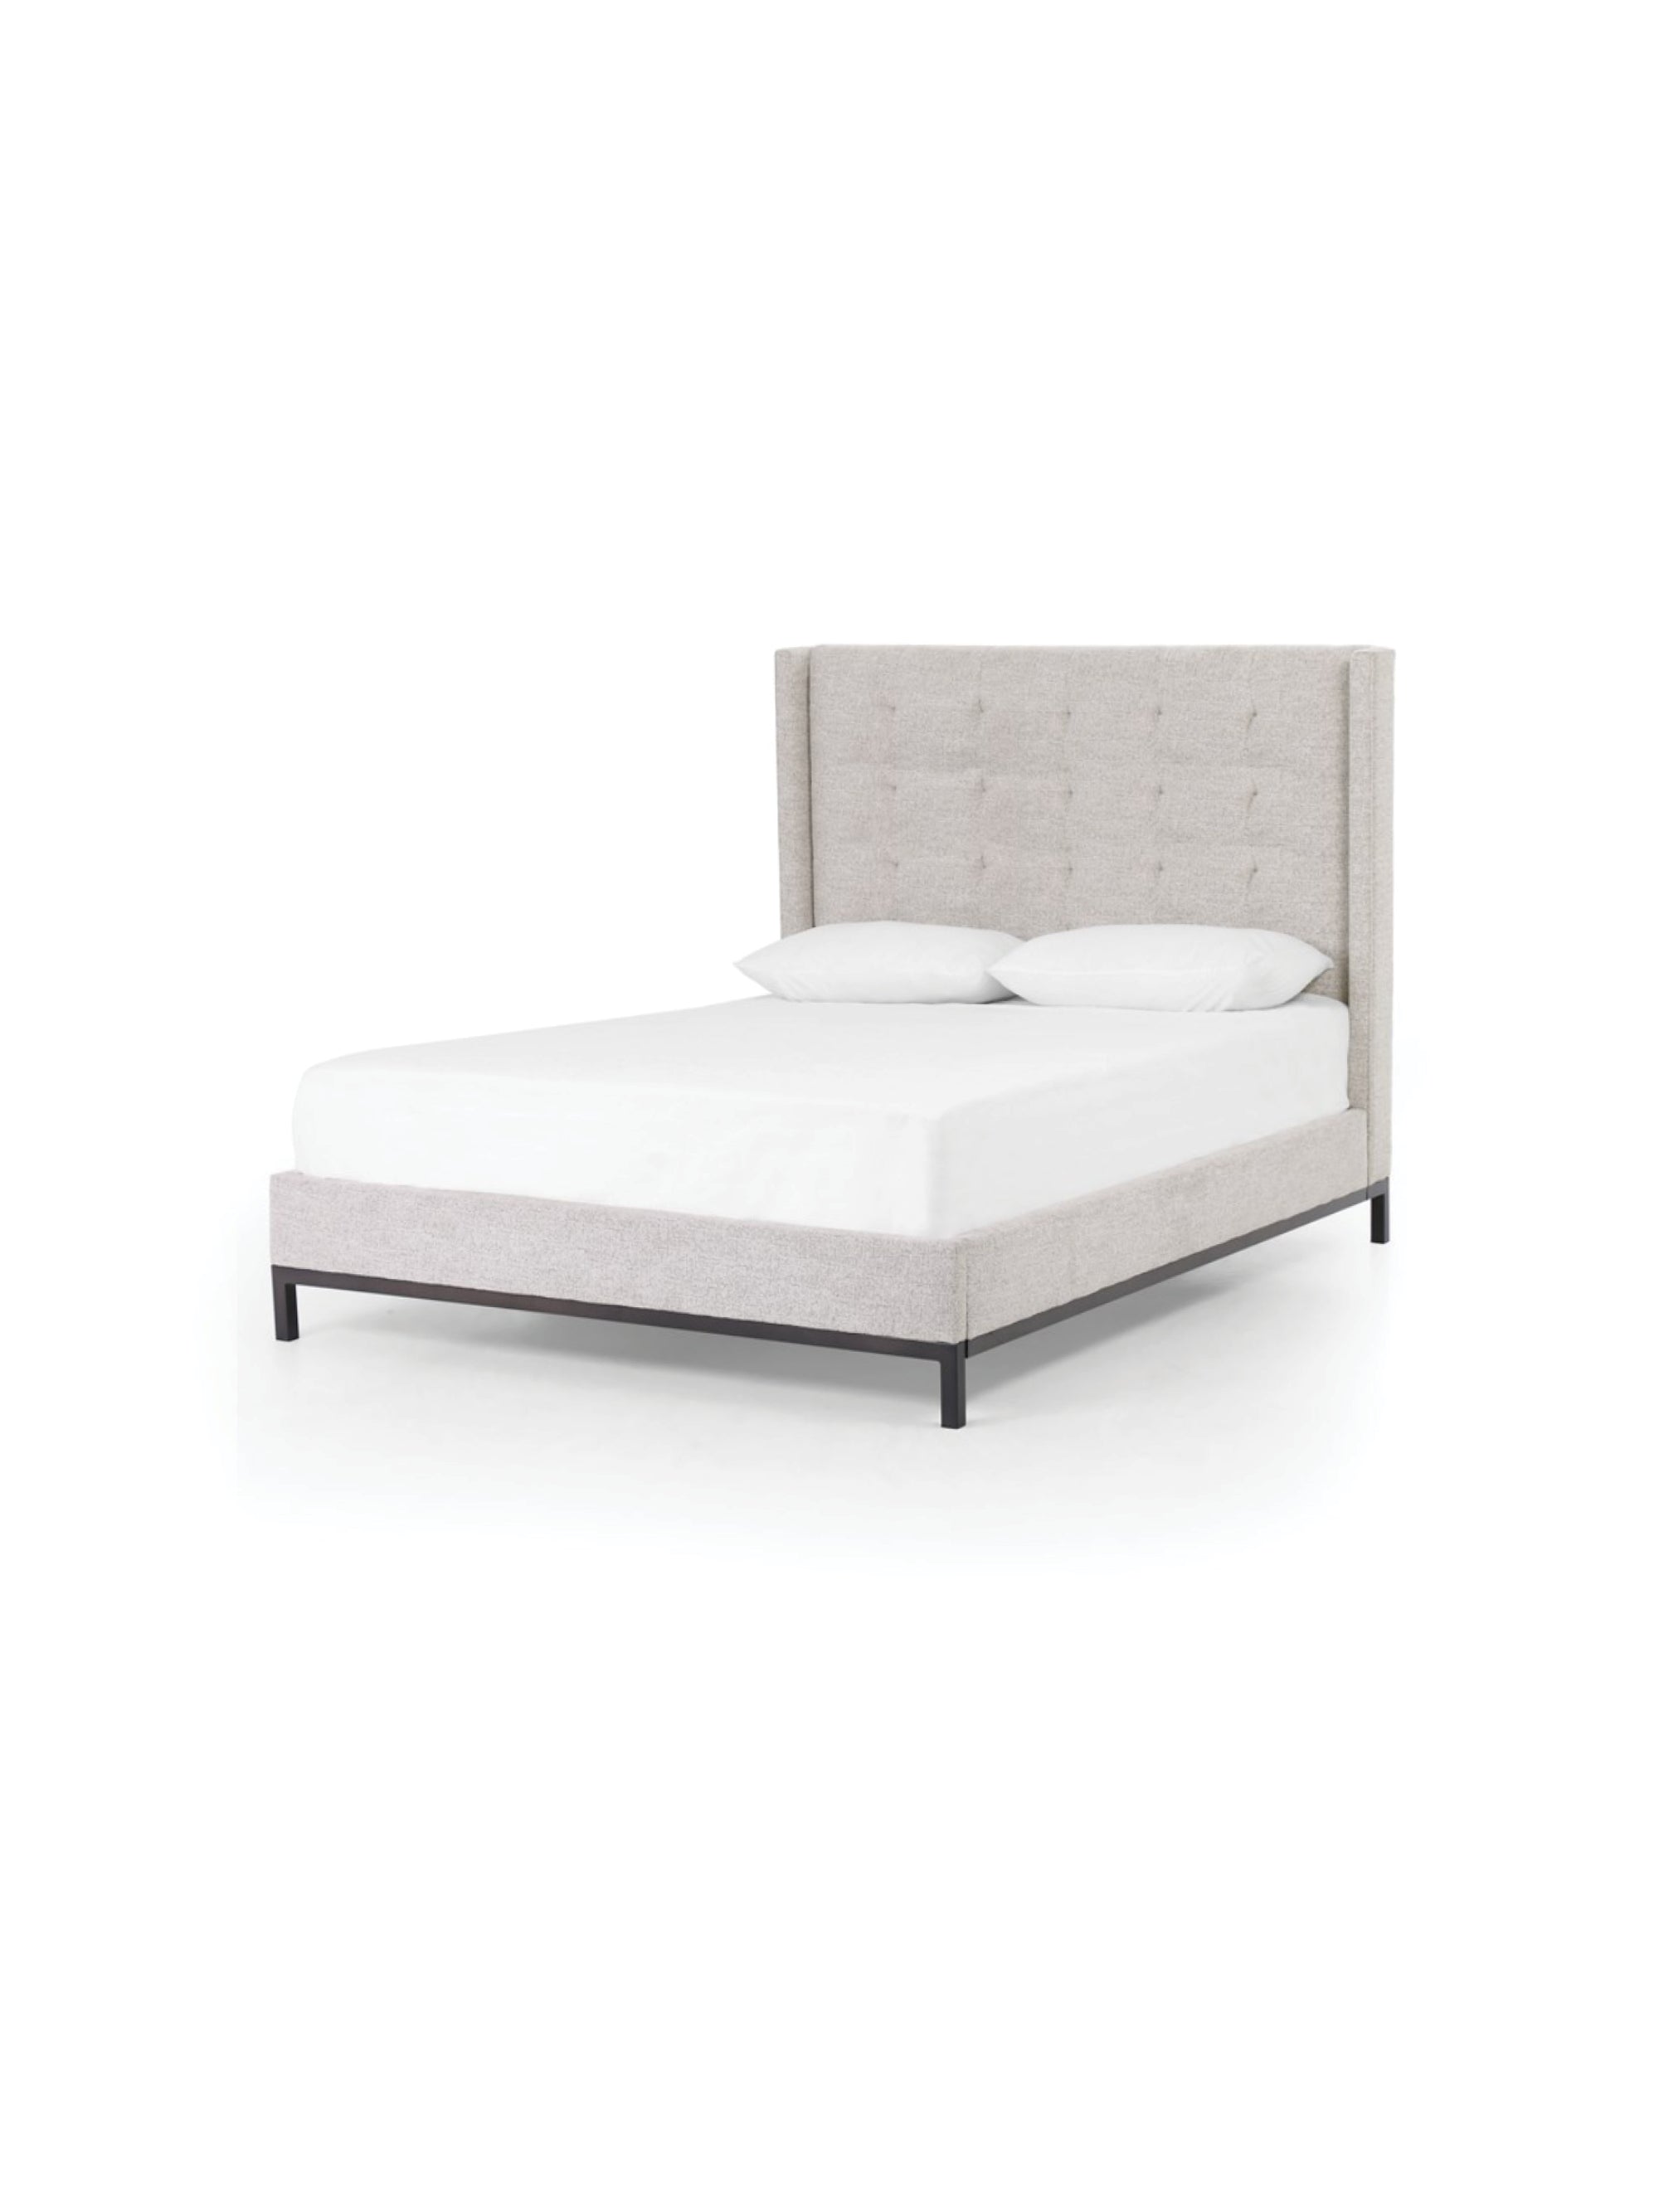 Newhall Bed 55"